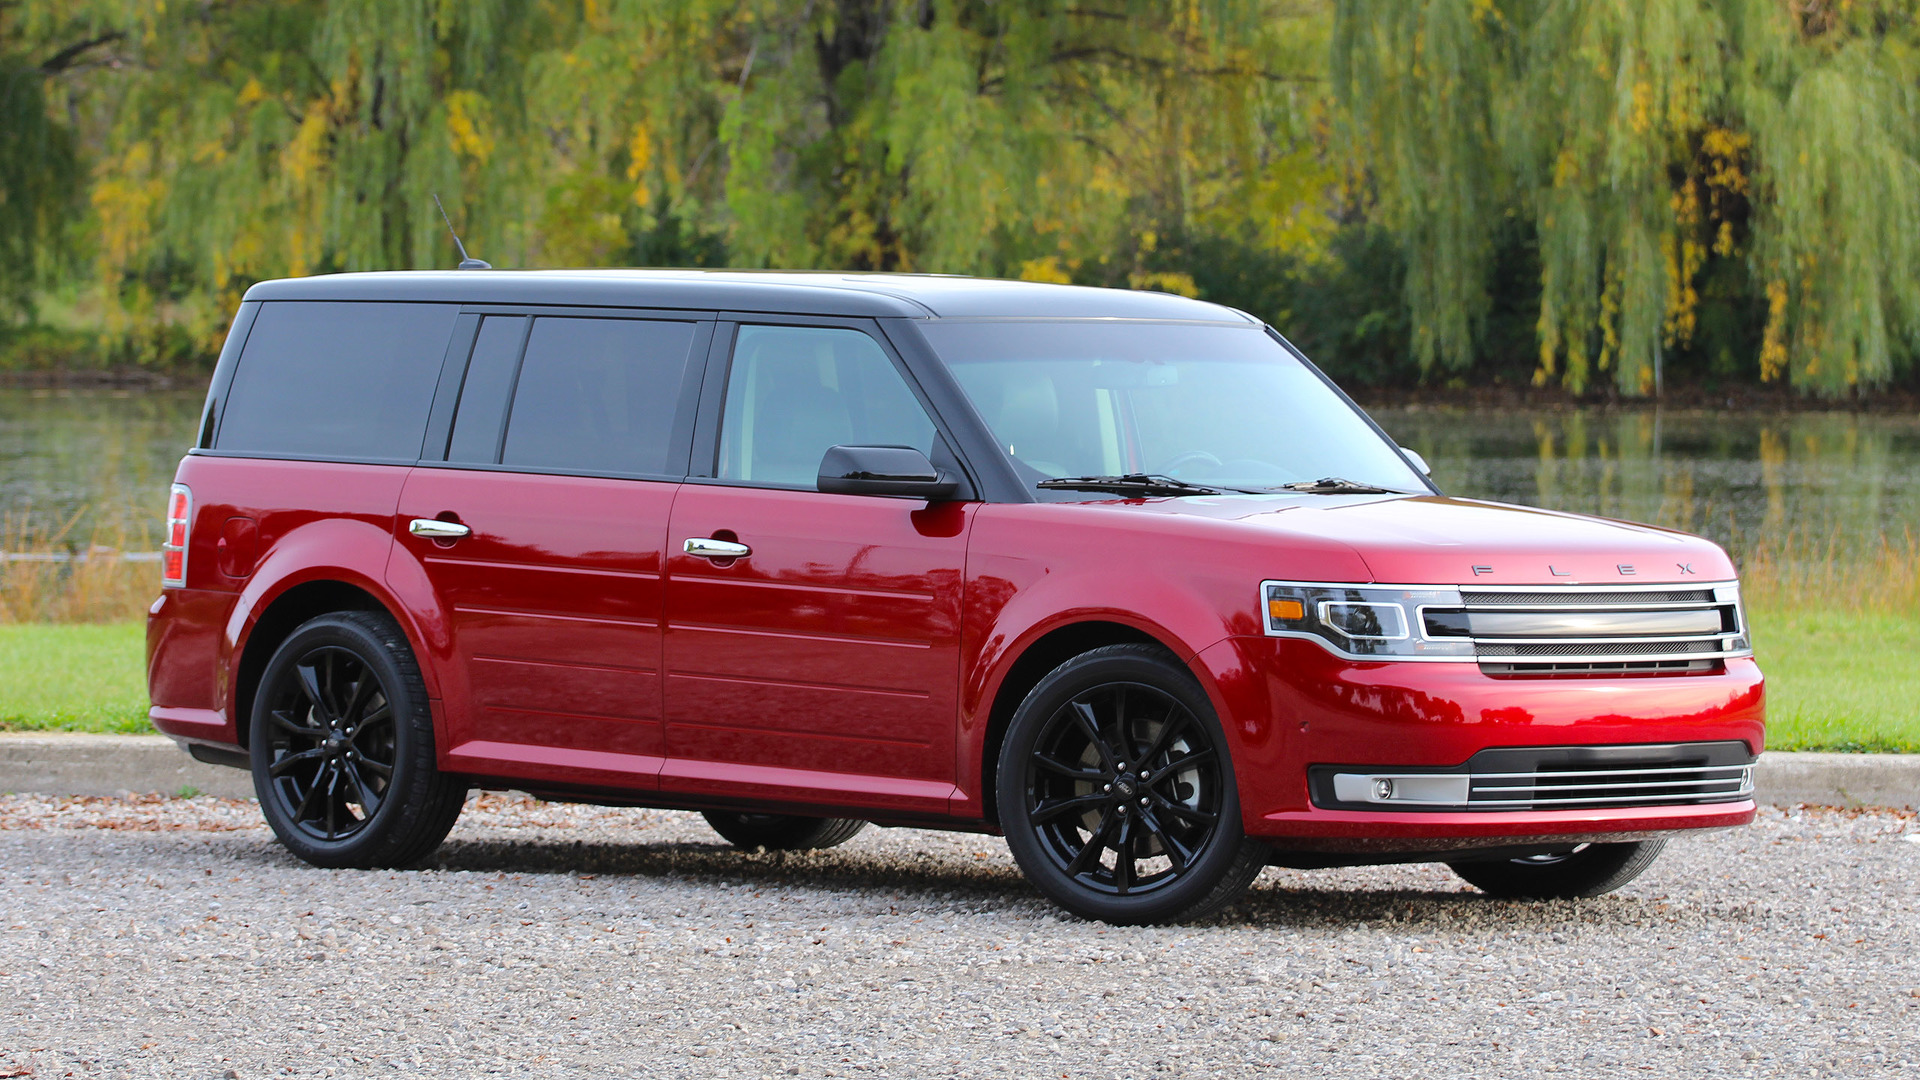 2016 Ford Flex Review: Minivan for cool dads